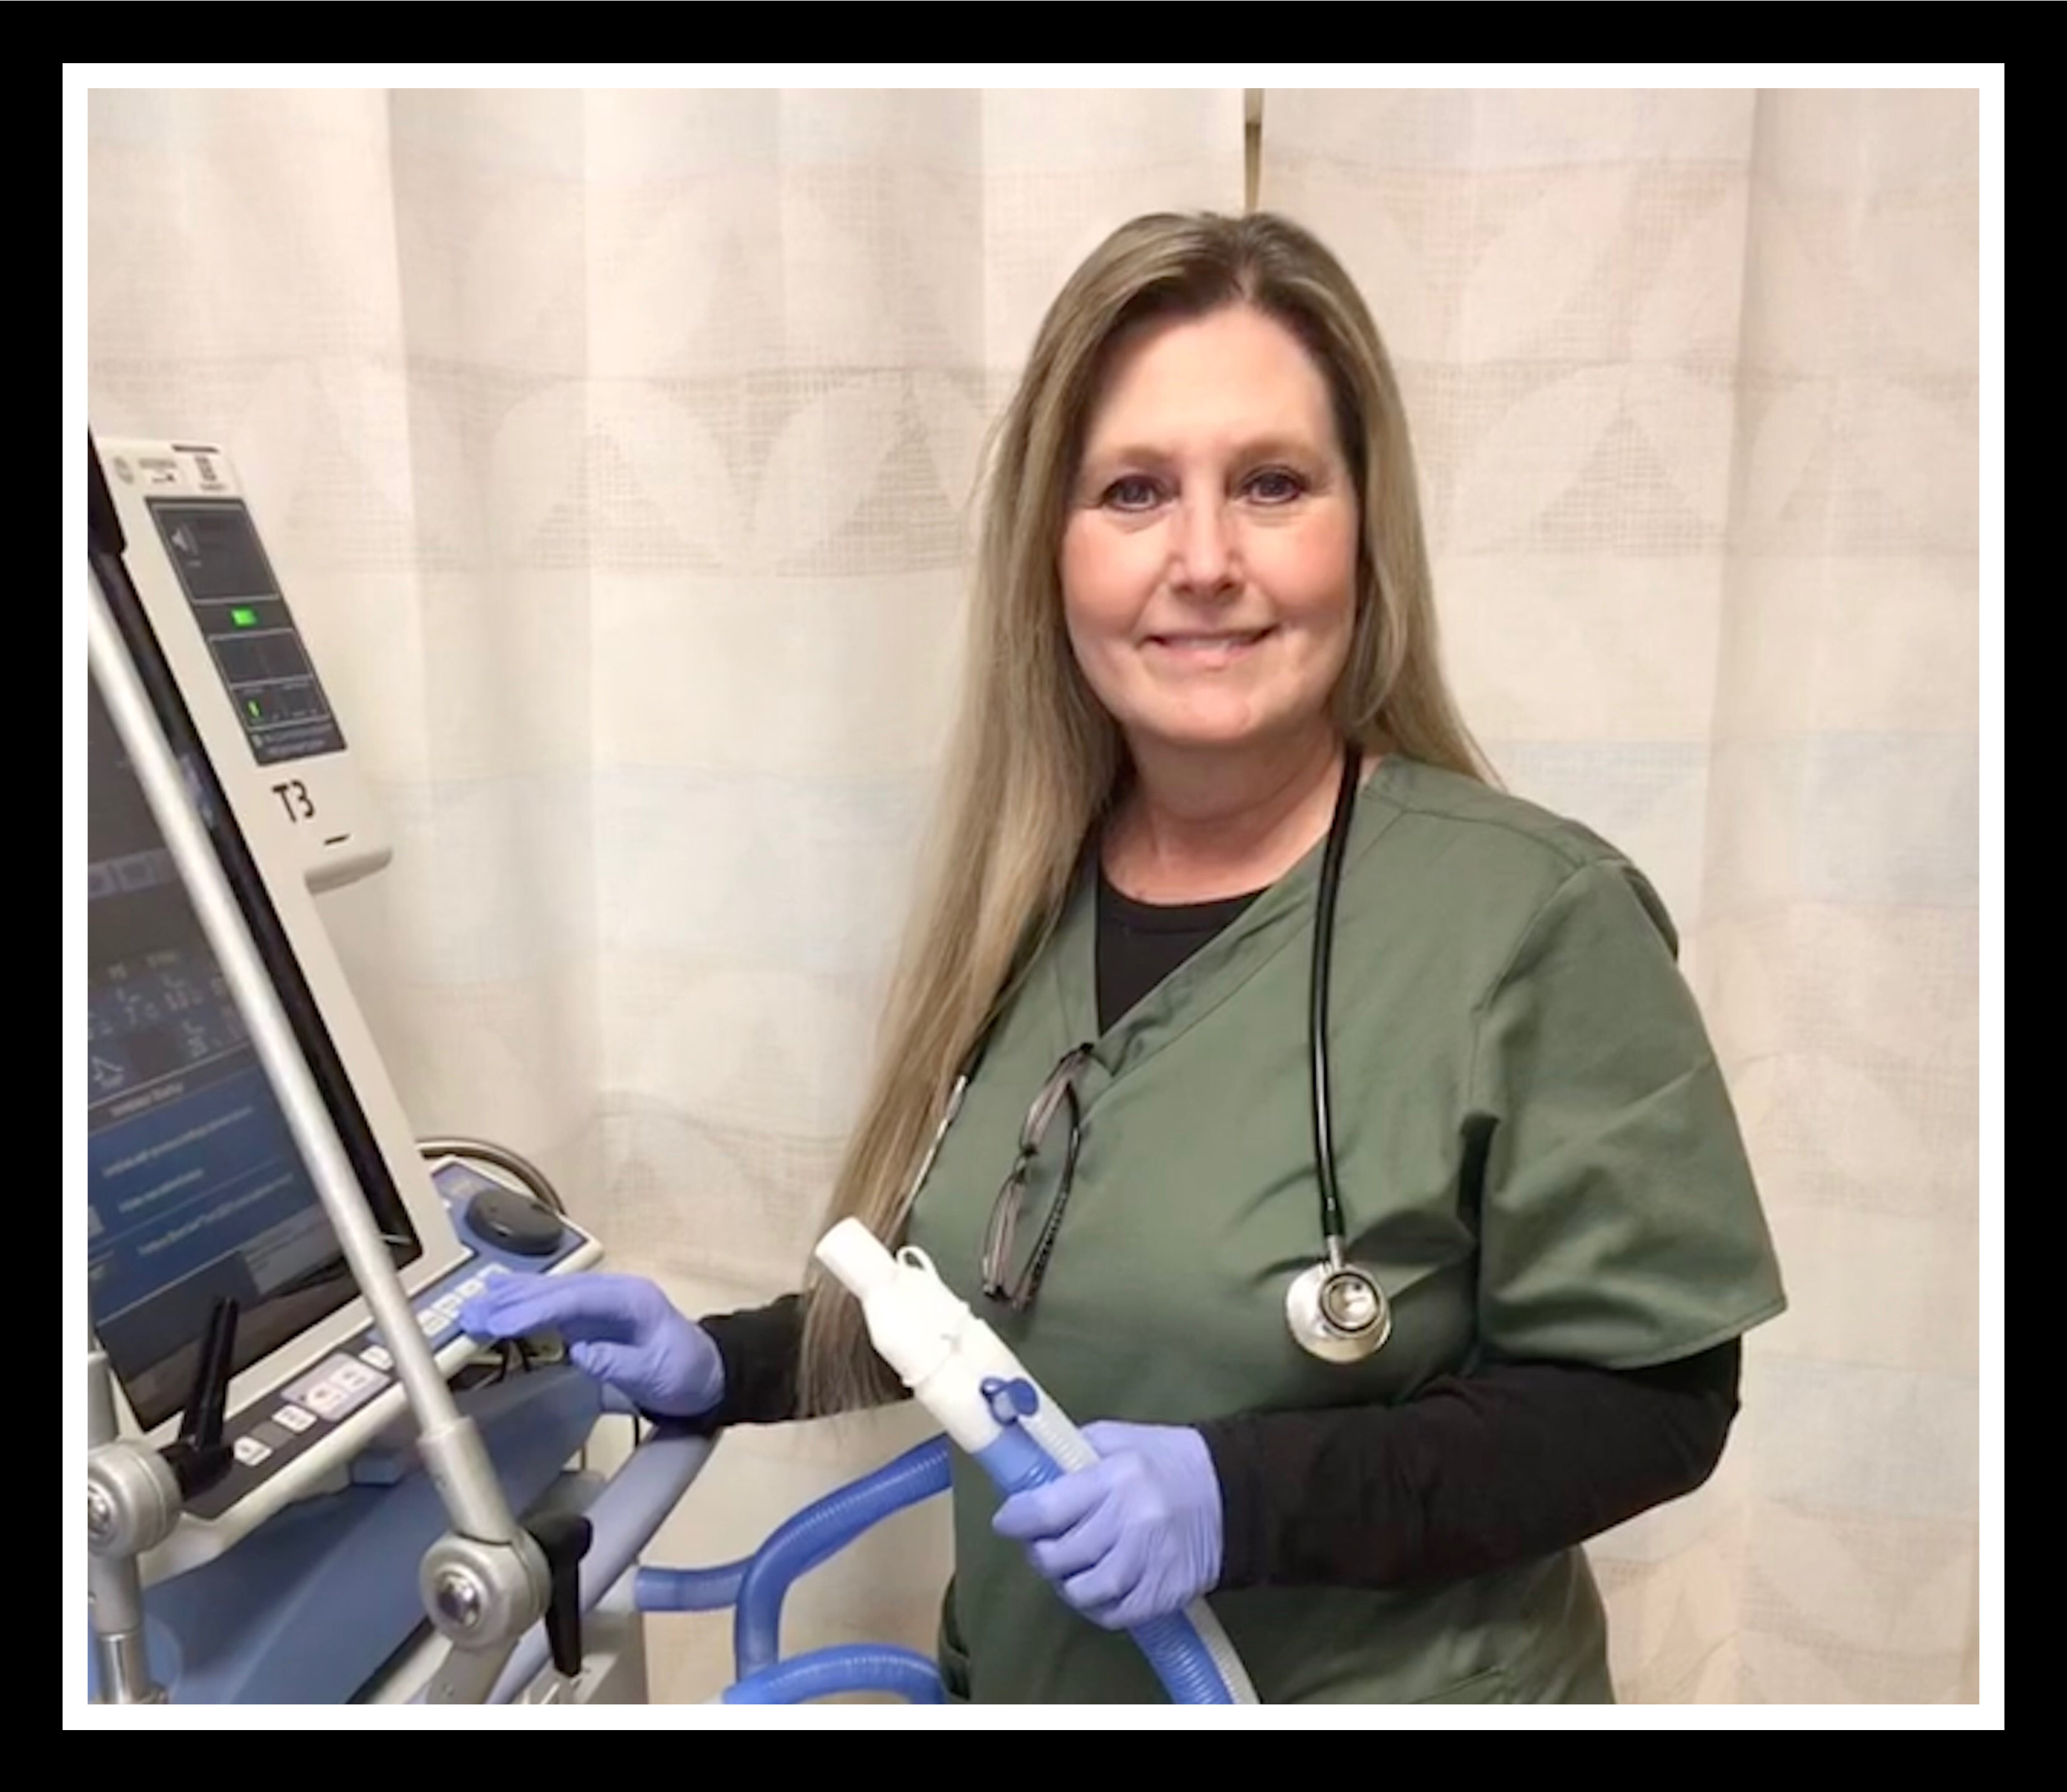 Respiratory therapist Kimby Powell with a ventilator